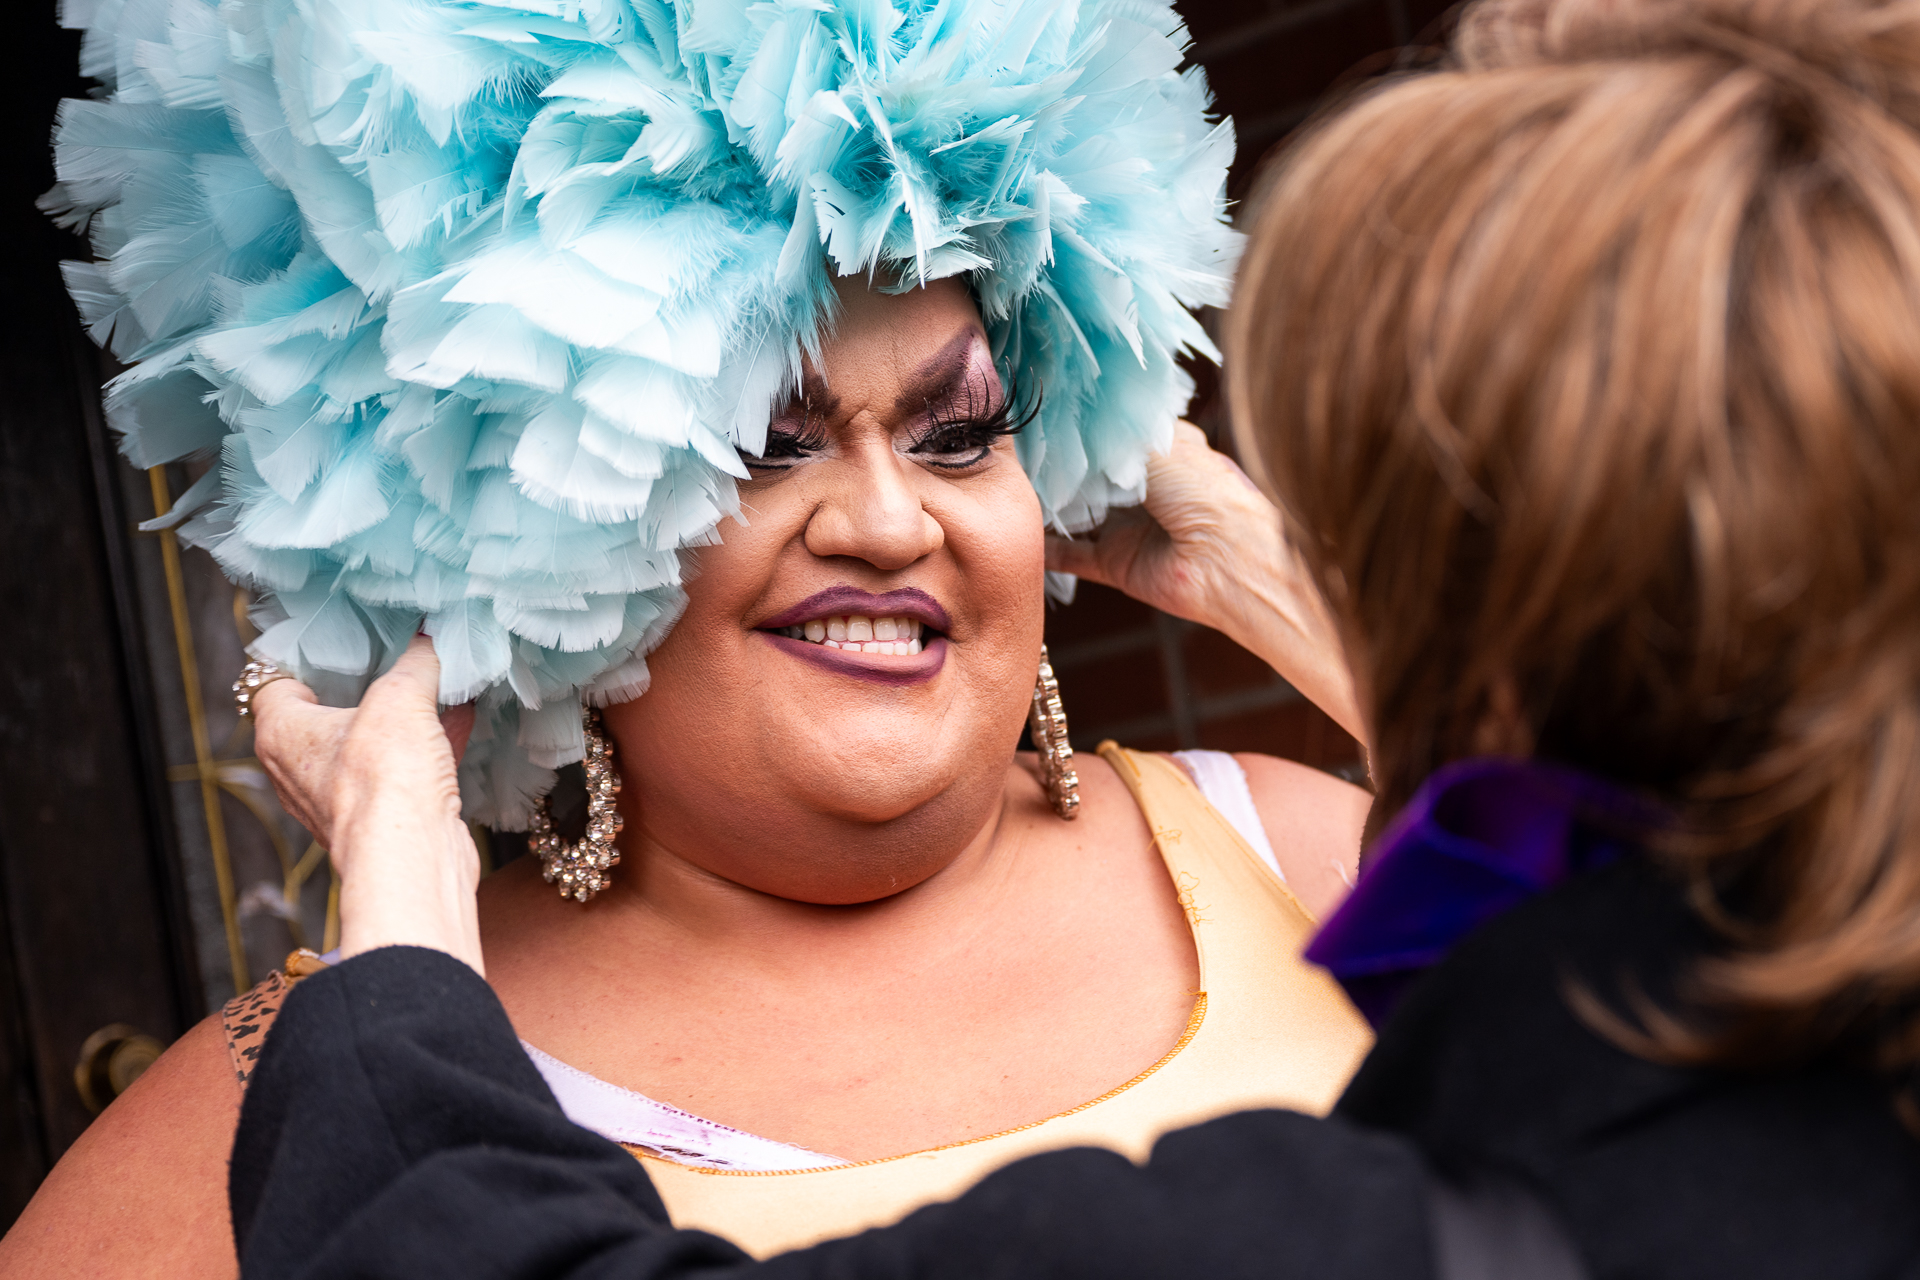 A drag artist is given a blue wig as they smile while another drag artist puts it on.